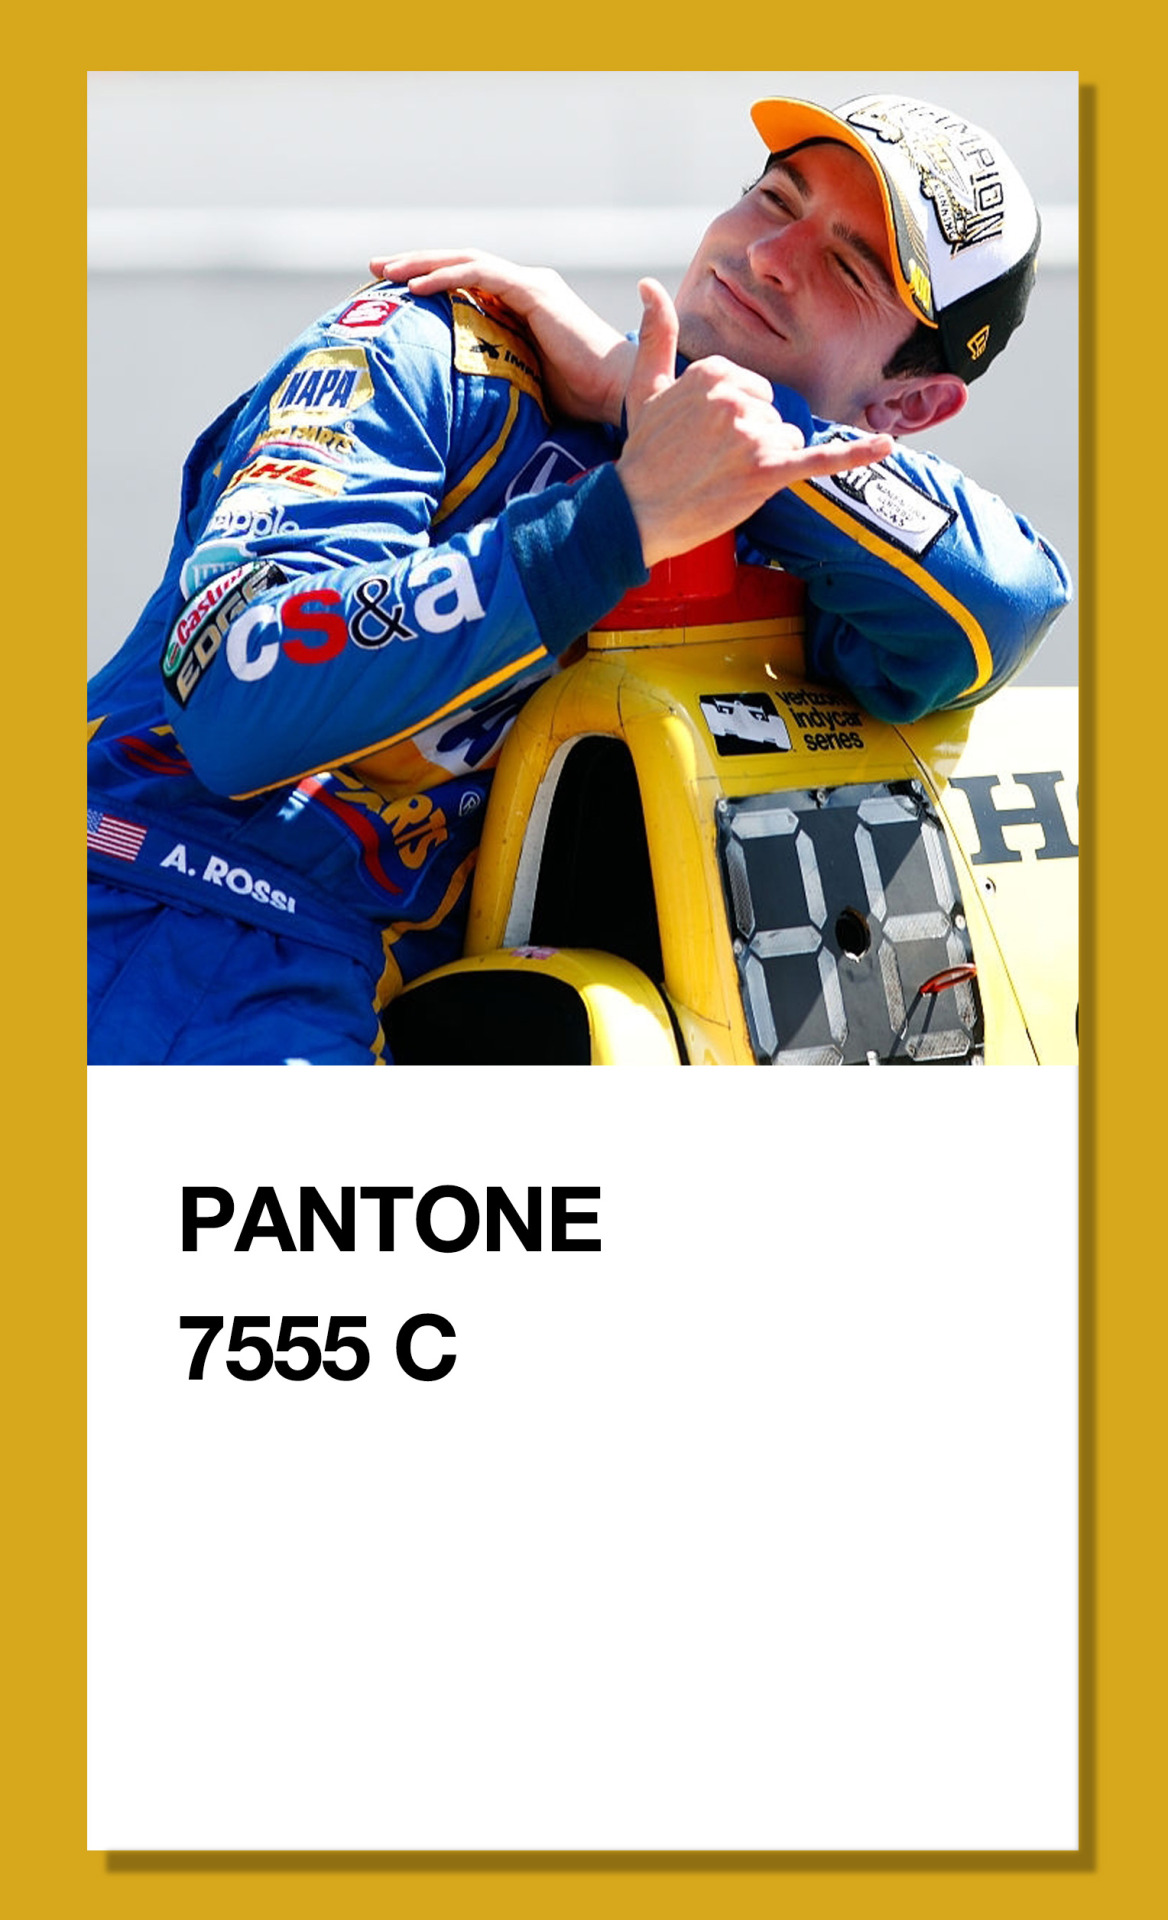 PANTONE EDIT: 7555 C; 217 C #scrapbooking#pantone#alexander rossi#andretti autosport #god i cannt  #2016 indy 500 #indycar #i watched this last night and cried  #that disbelieving commentator voice as he rounds the last corner like ... he did it....  #it was just so REAL  #and then his dad leaning into the cockpit  #and his track dads drinking the milk !!!!!!!!!!  #three whole dads